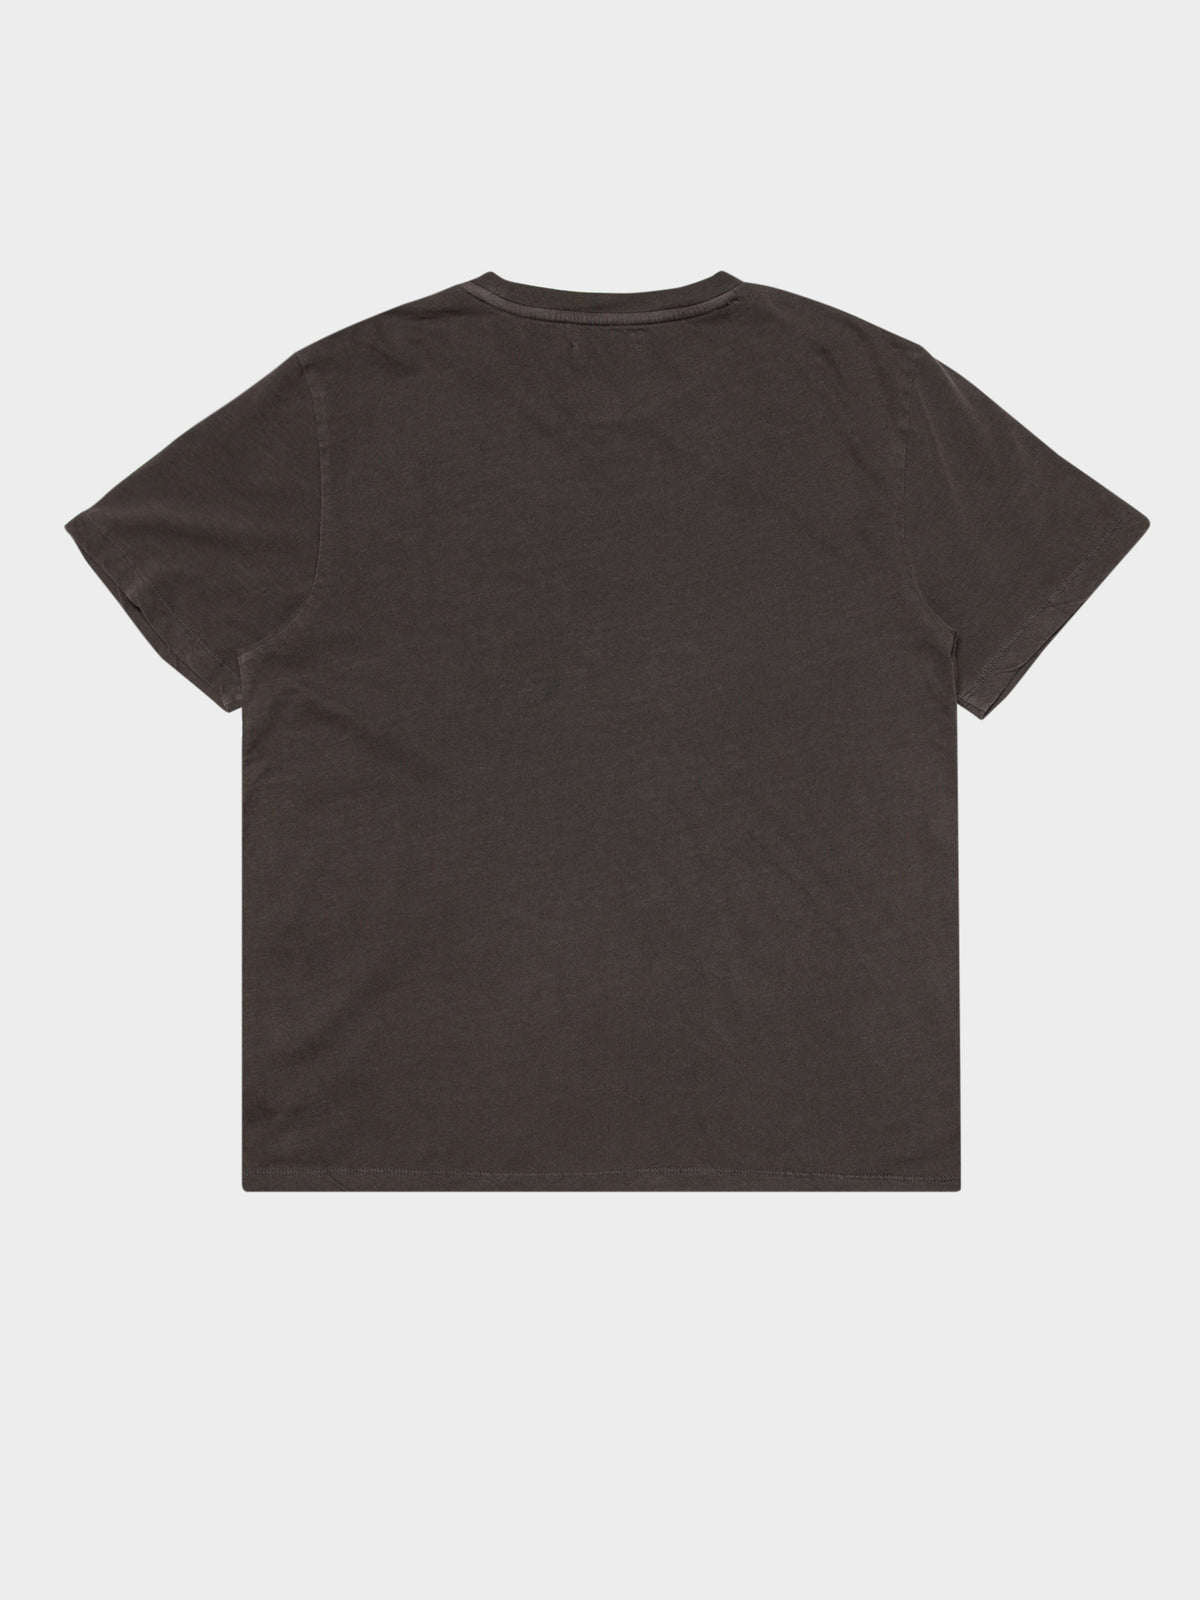 Scorpion T-Shirt in Washed Black